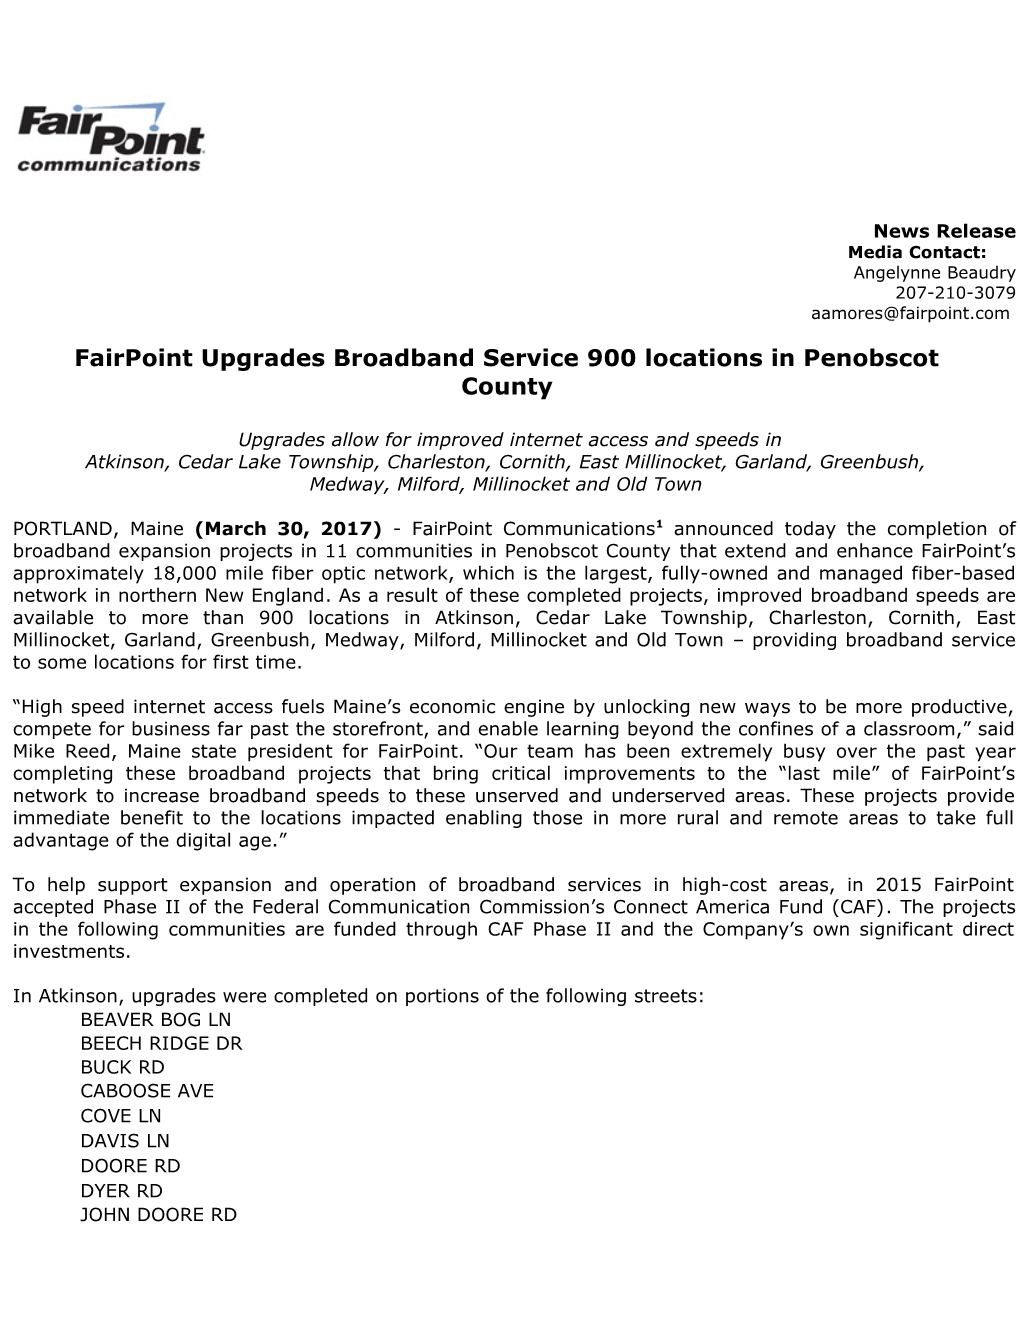 Fairpoint Upgrades Broadband Service 900 Locations in Penobscot County